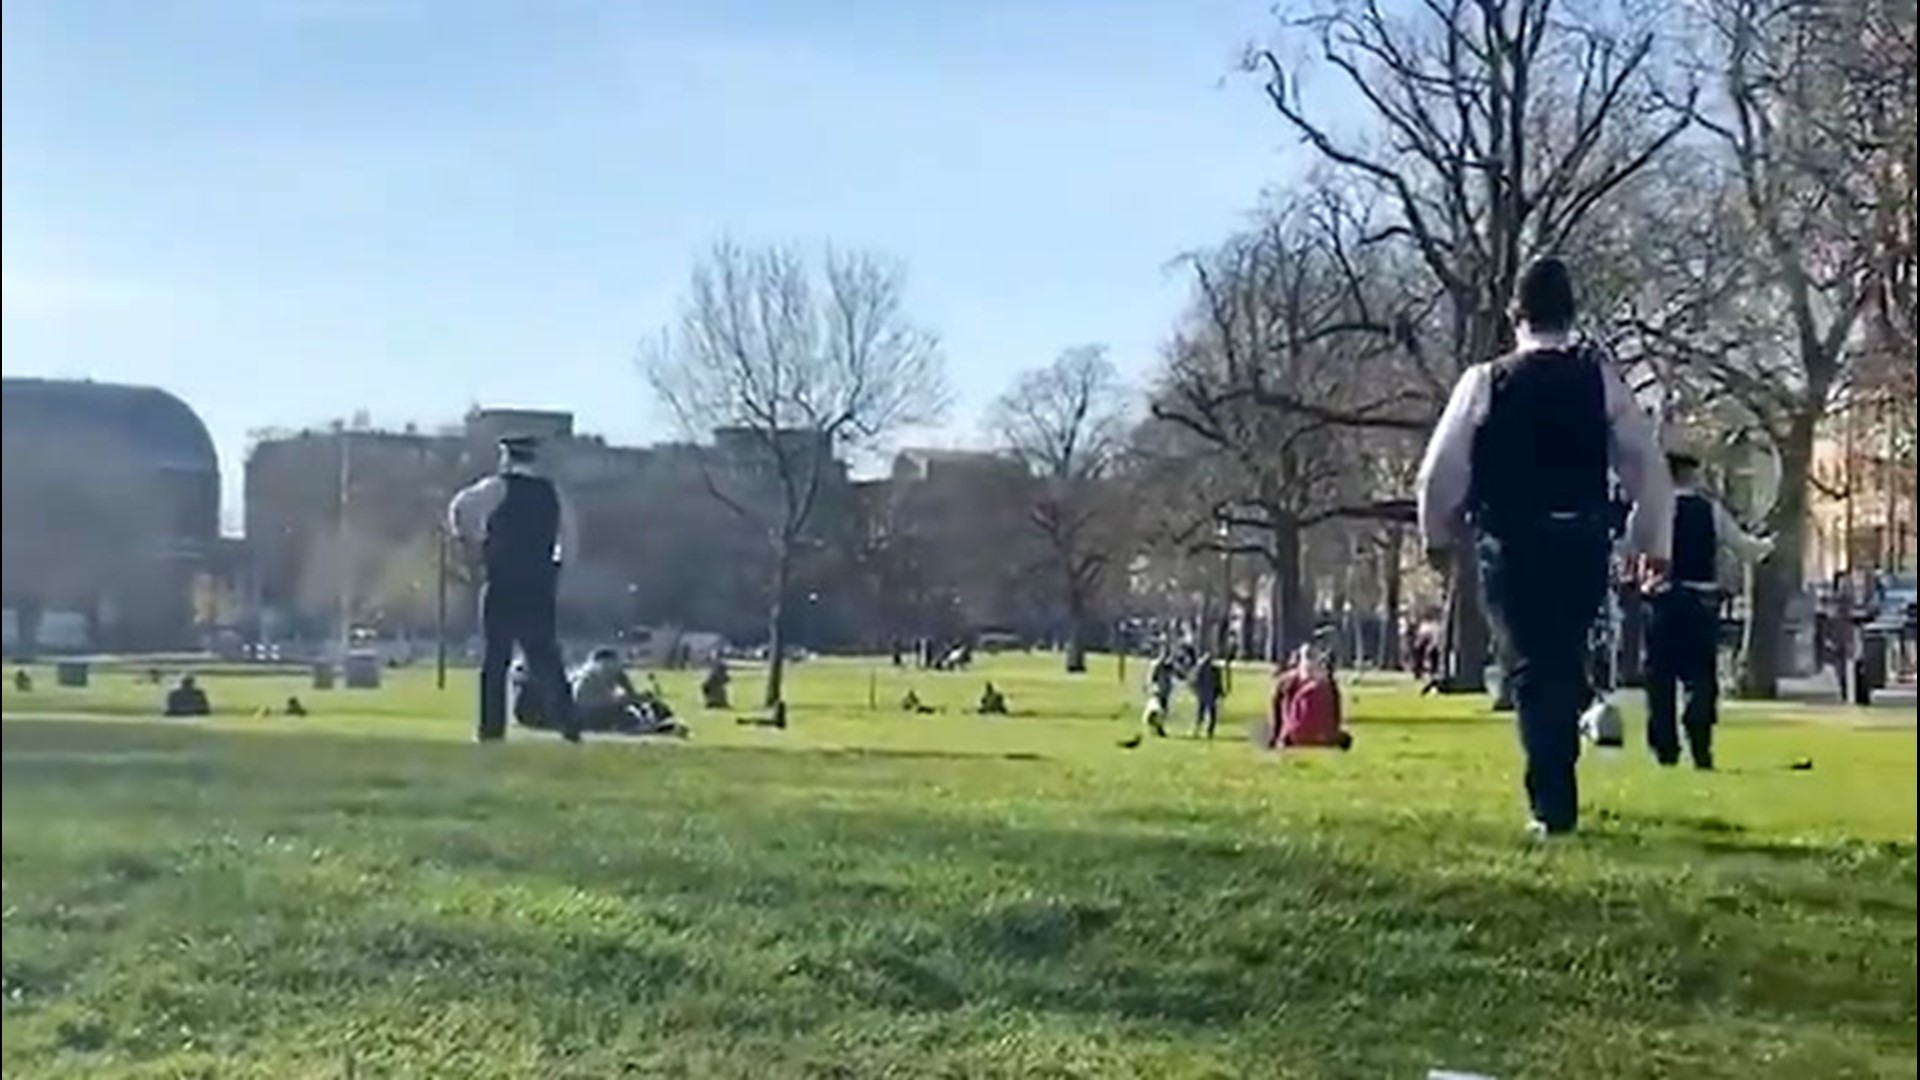 The police here in London, England, caught people sunbathing during a national lockdown on March 24 and urged them to go home in midst of the COVID-19 pandemic.